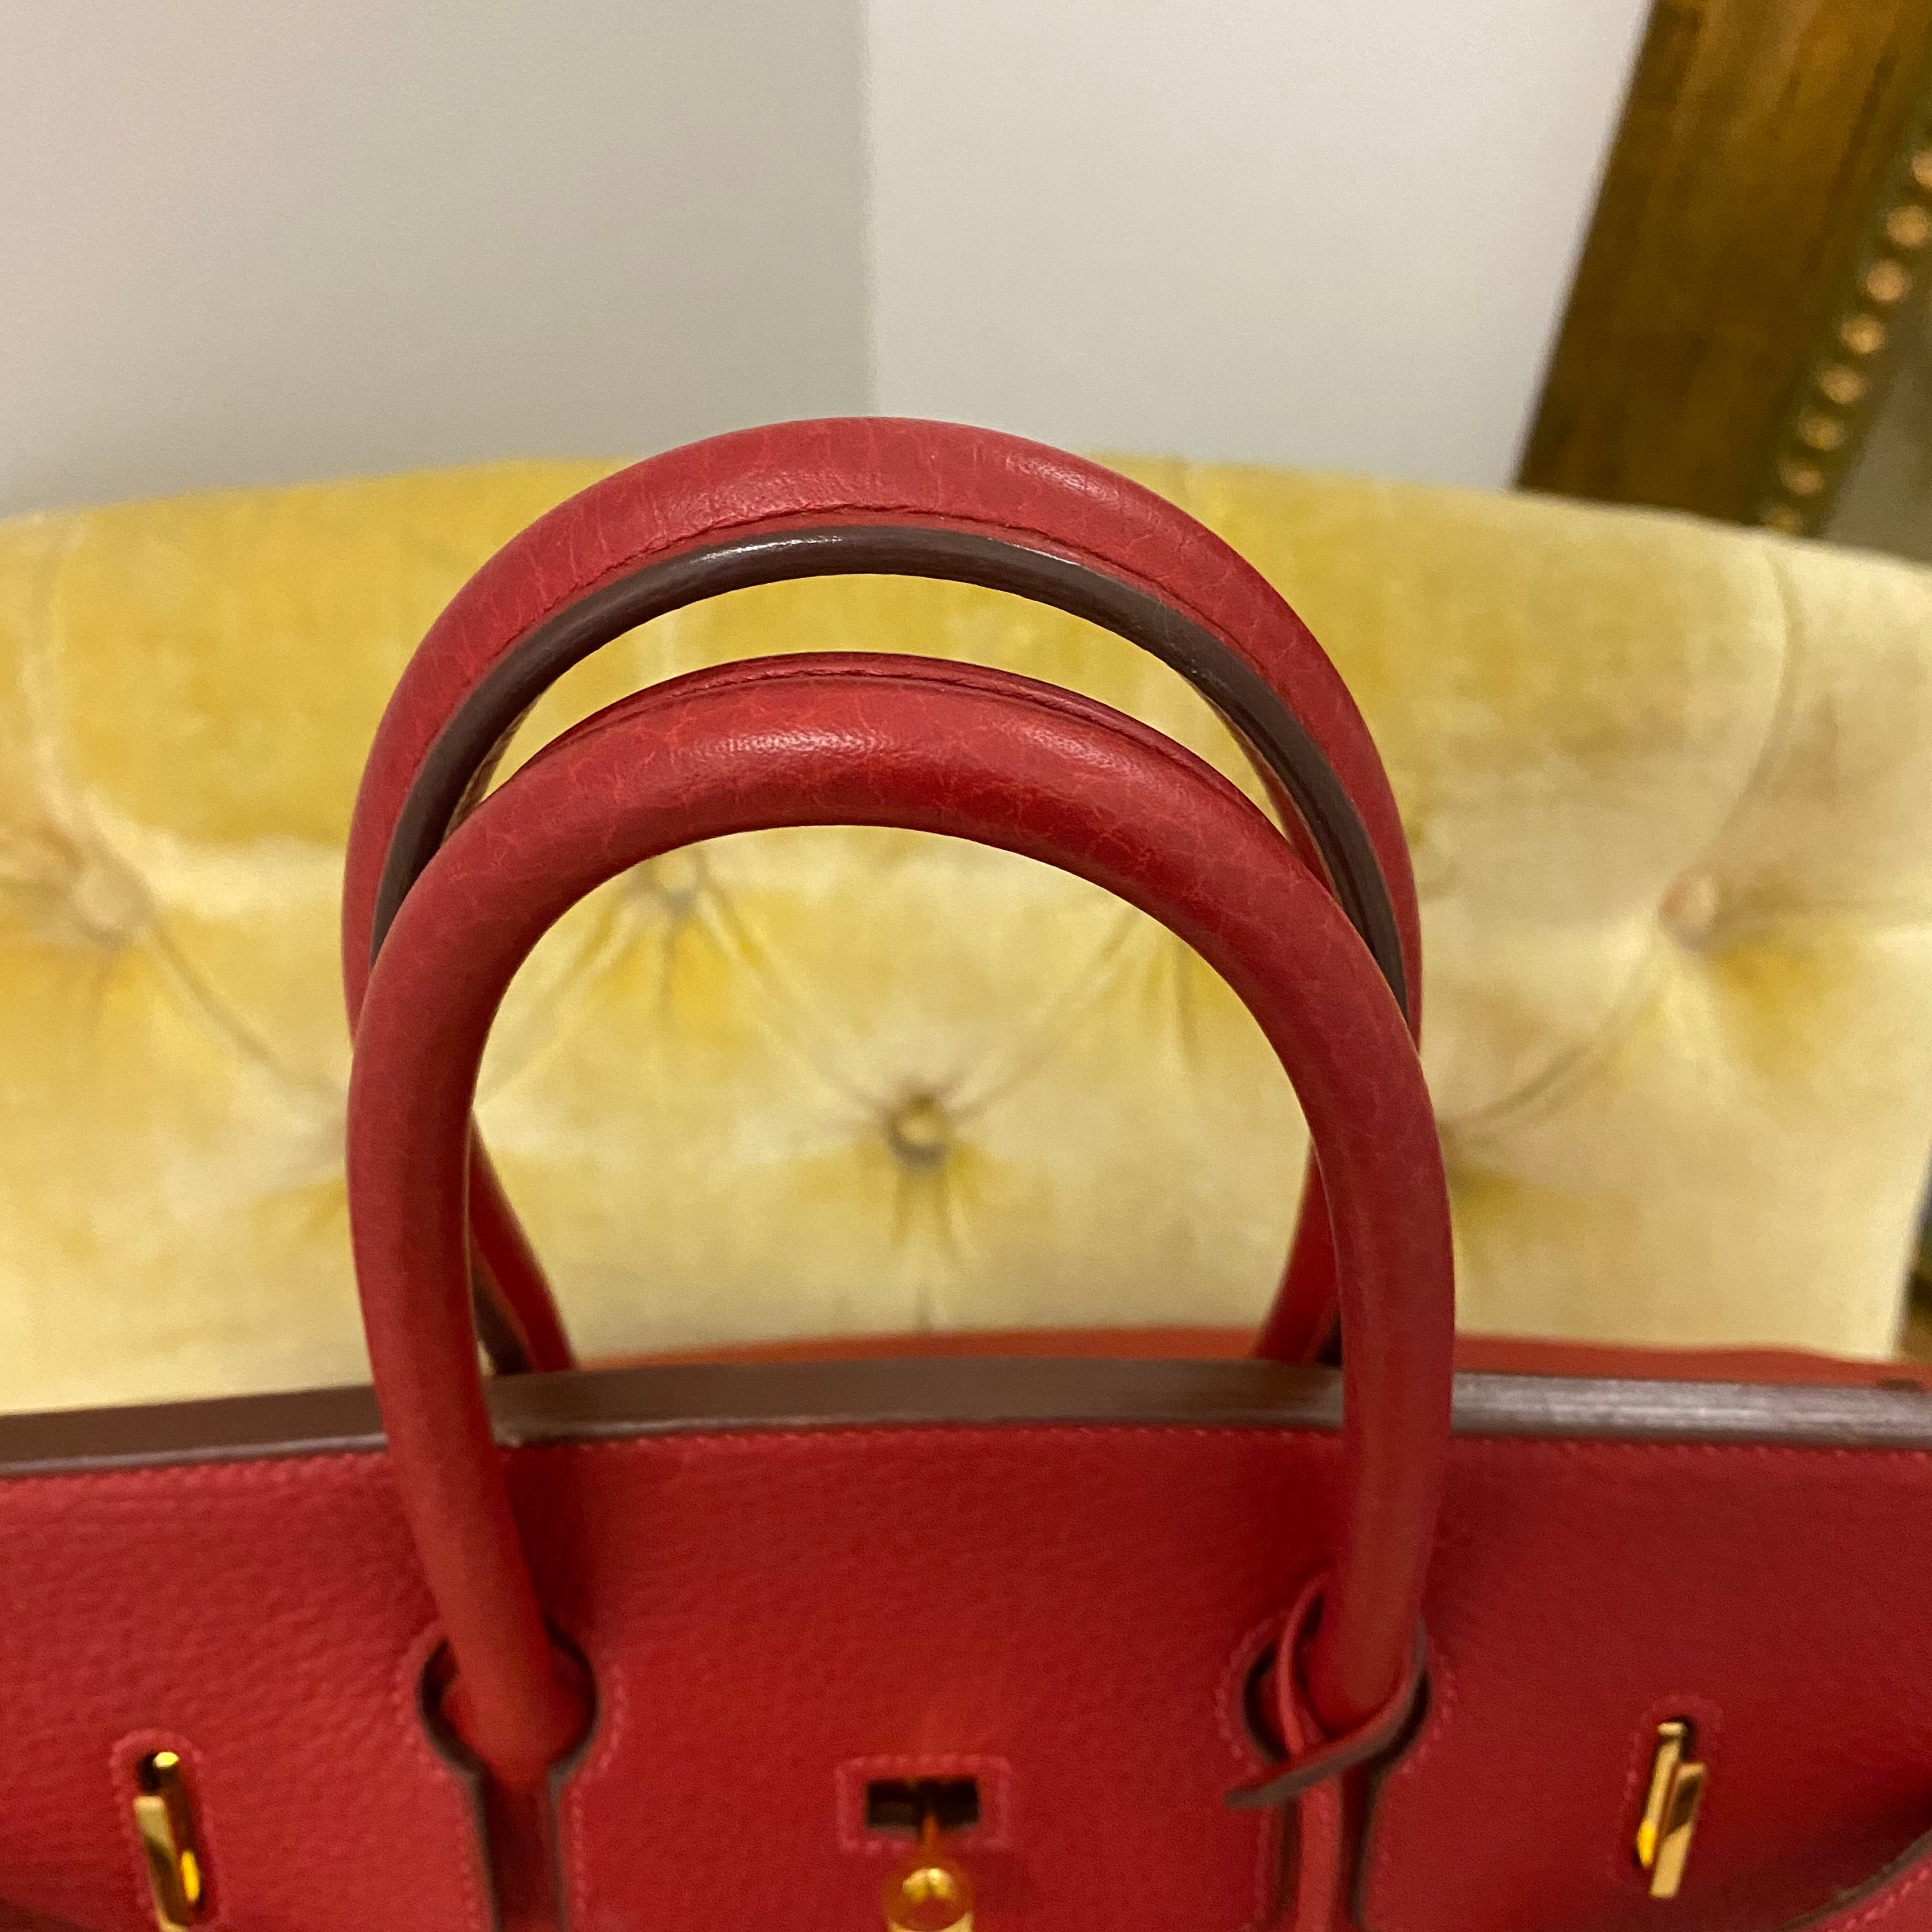 hermesbirkin1213 - BK touch national flag red Q5 imported calfskin Togo  spell Ferrari red bright surface Nile crocodile 25cm special good-looking  spelling.